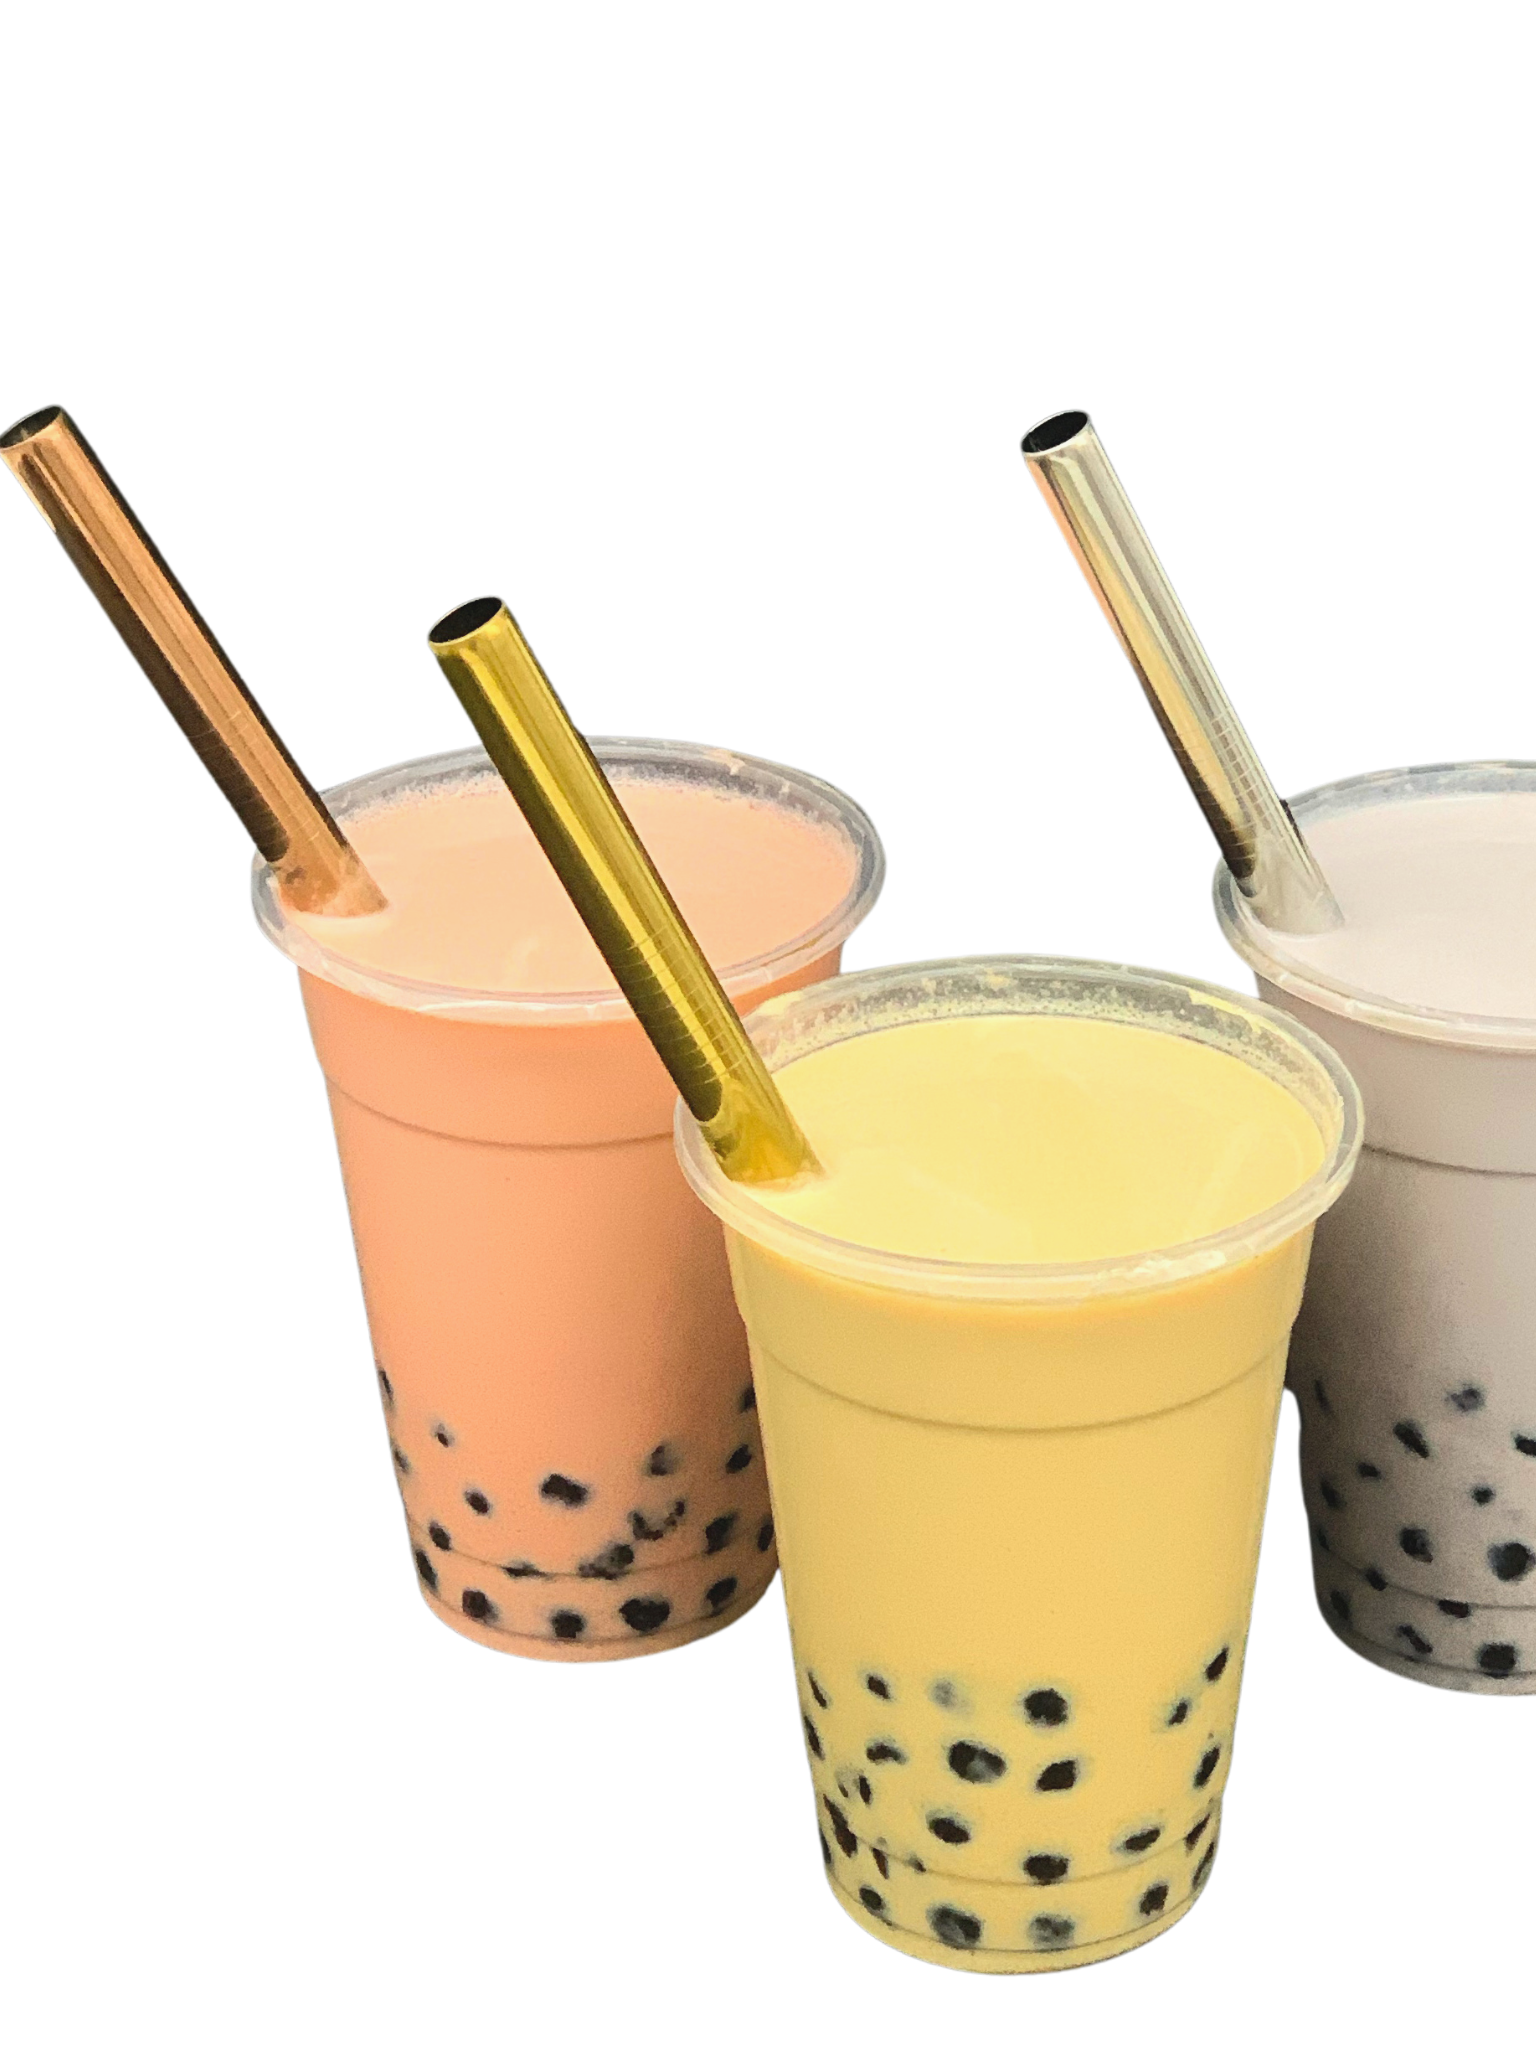 12 mm engraved stainless steel bubble tea straw